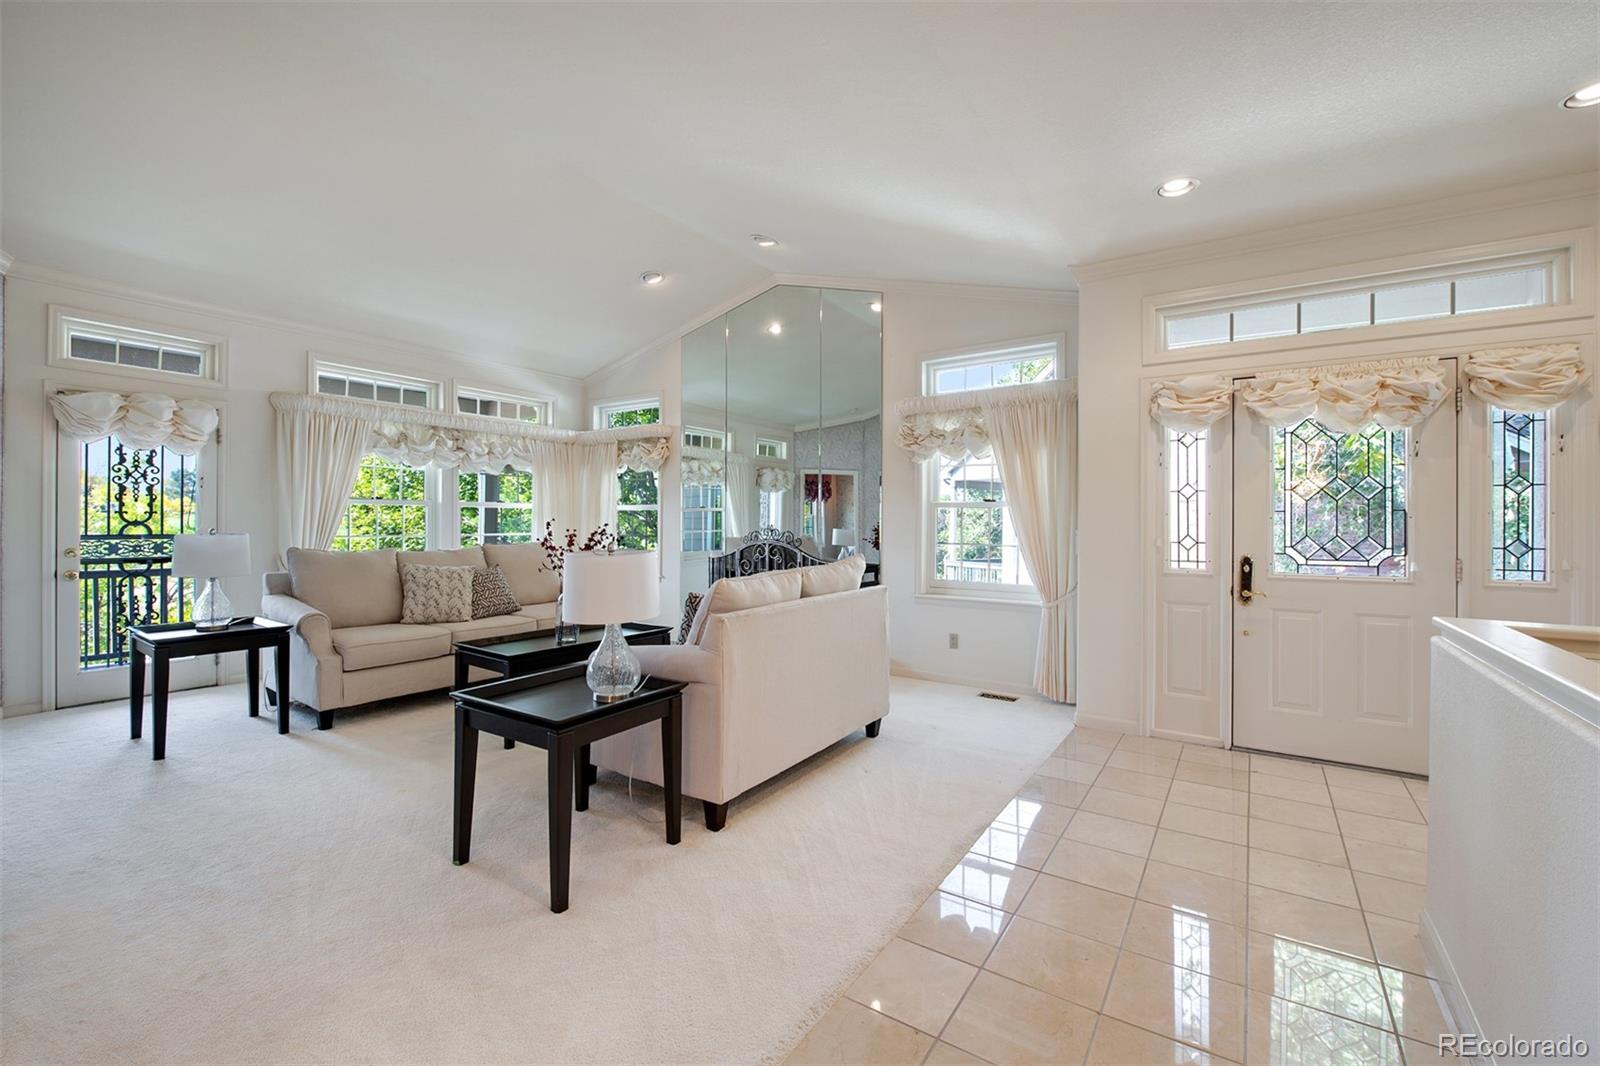 Open concept family room with vaulted ceilings and an abundance of windows and natural light!